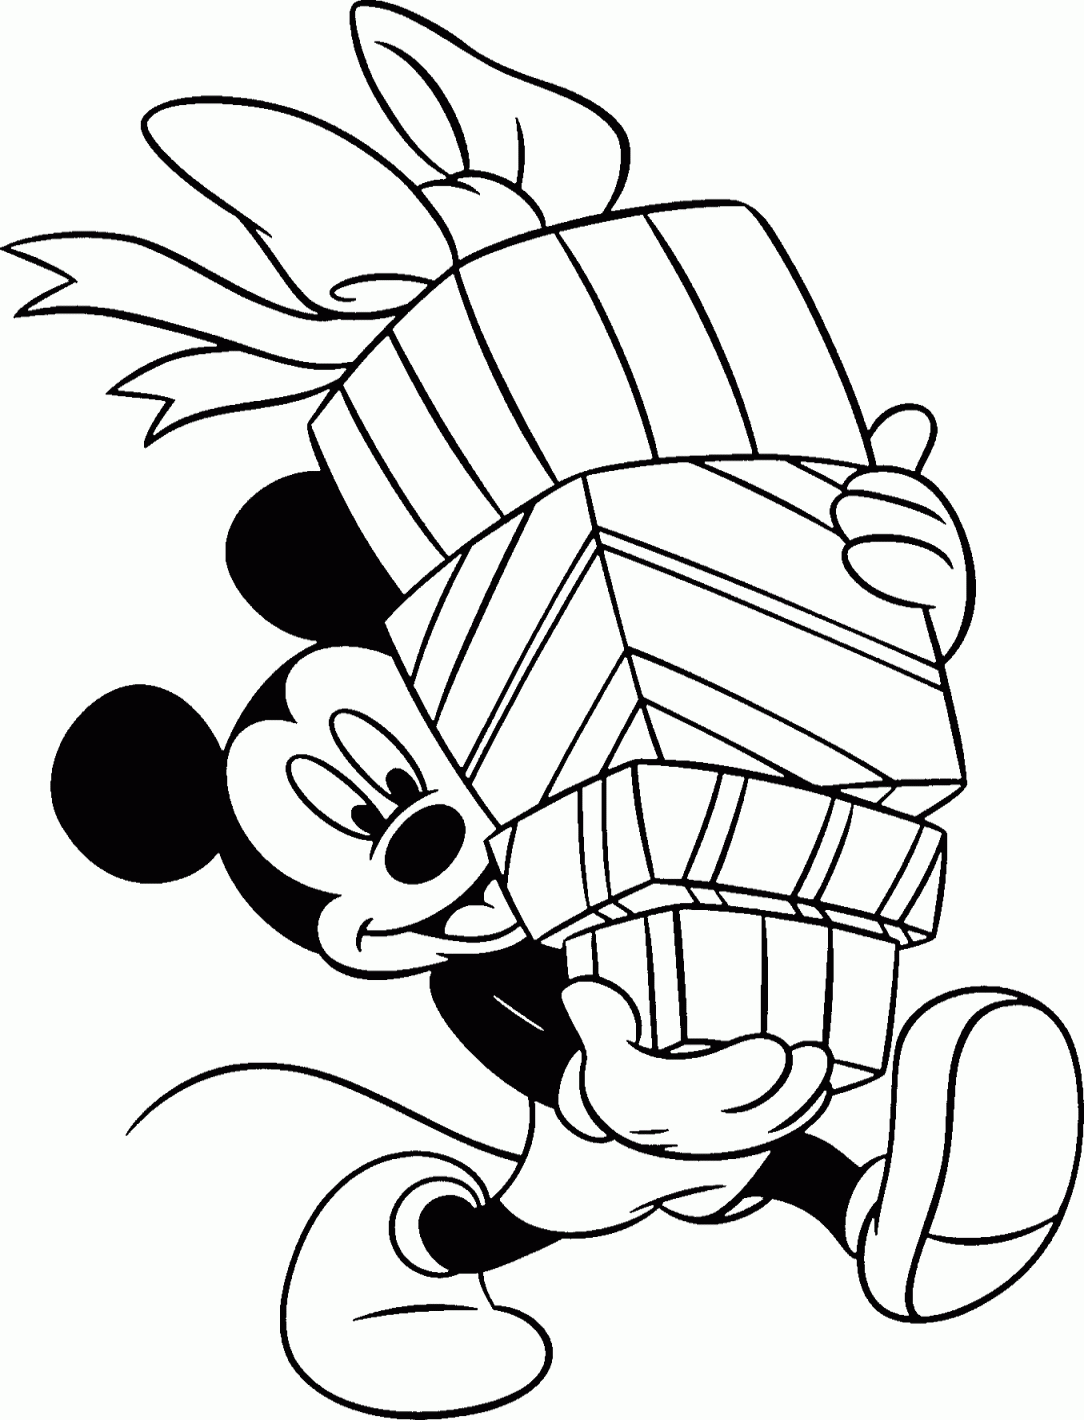 Mickey Mouse Balloon Coloring Pages - Coloring Home